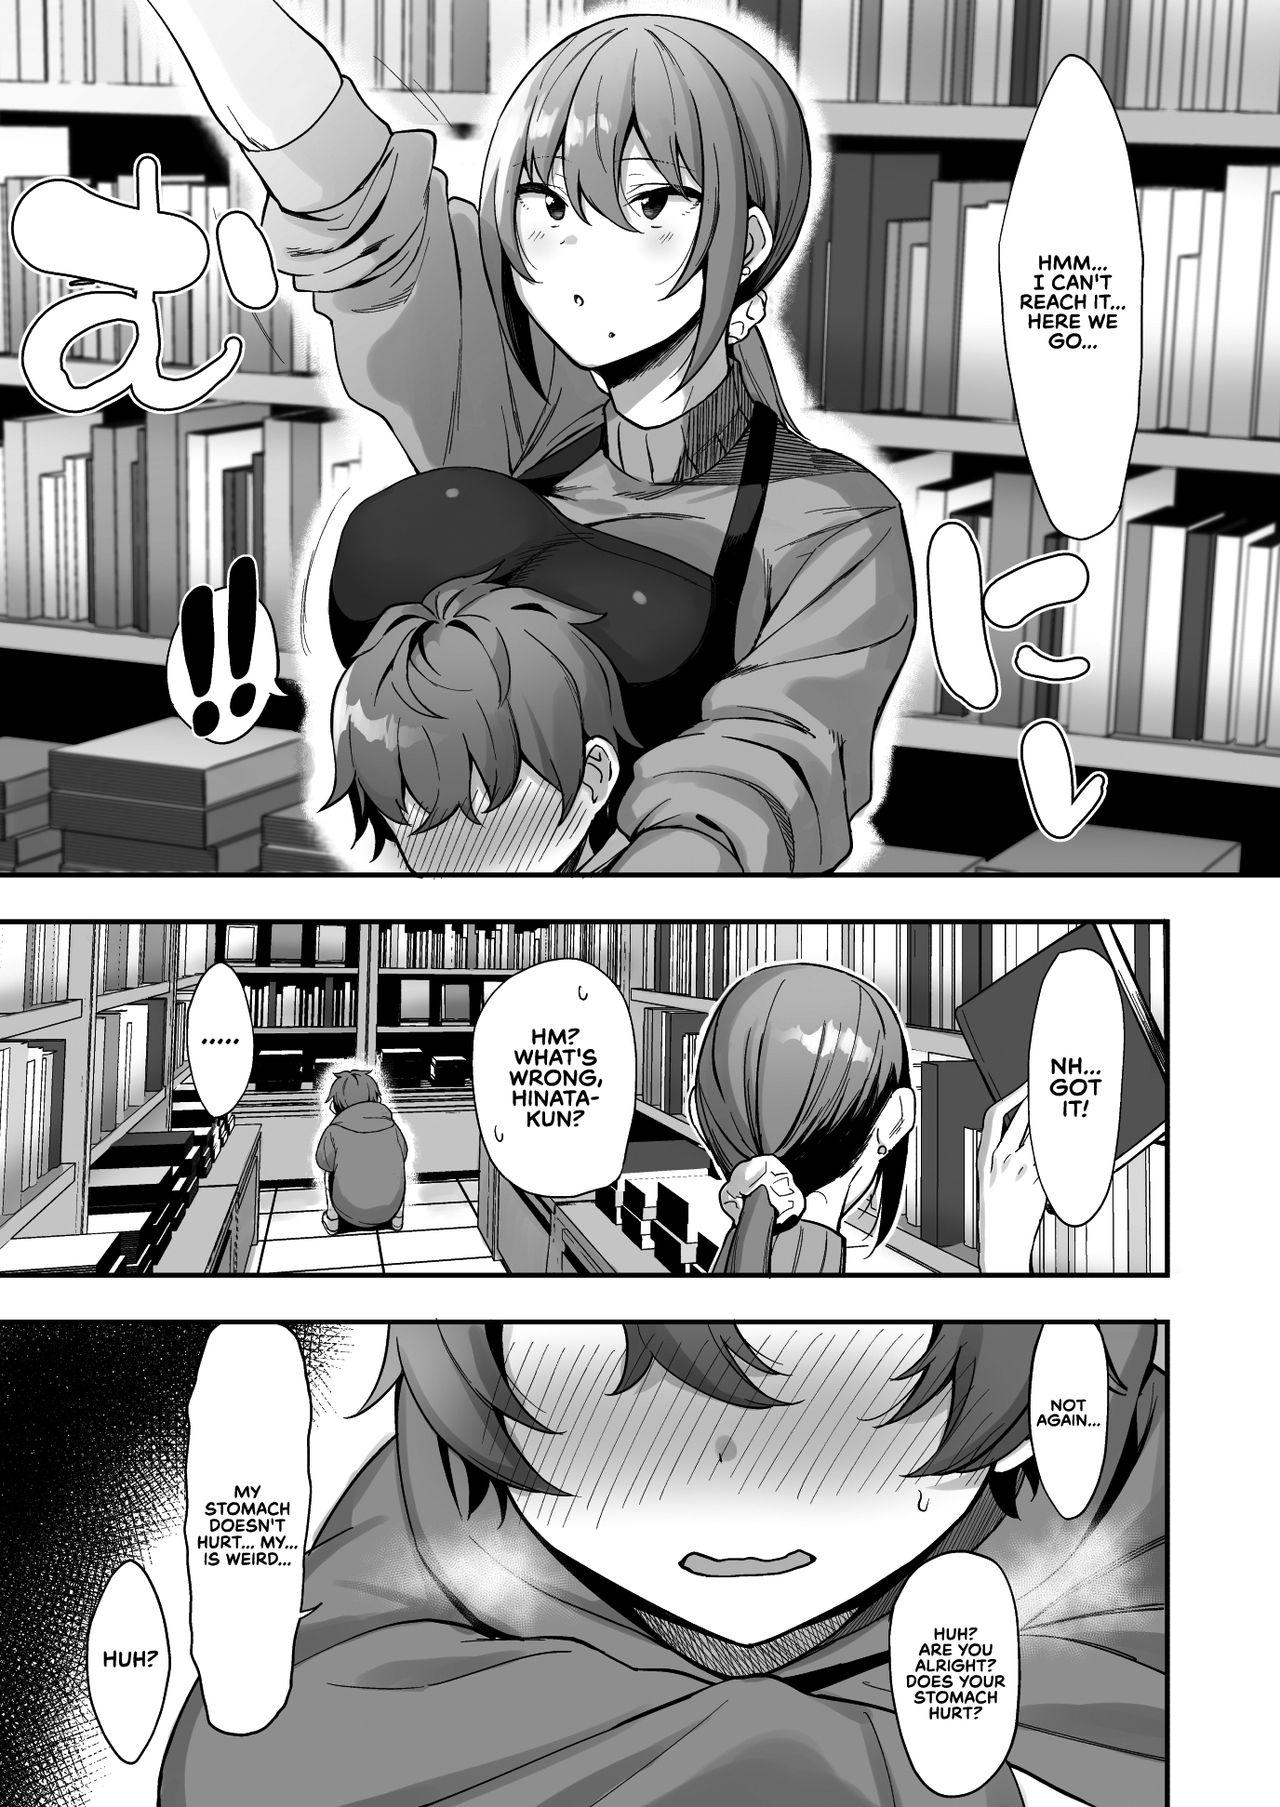 Corno Furuhonya no Onee-san to | With The Lady From The Used Book Shop - Original Ethnic - Page 8